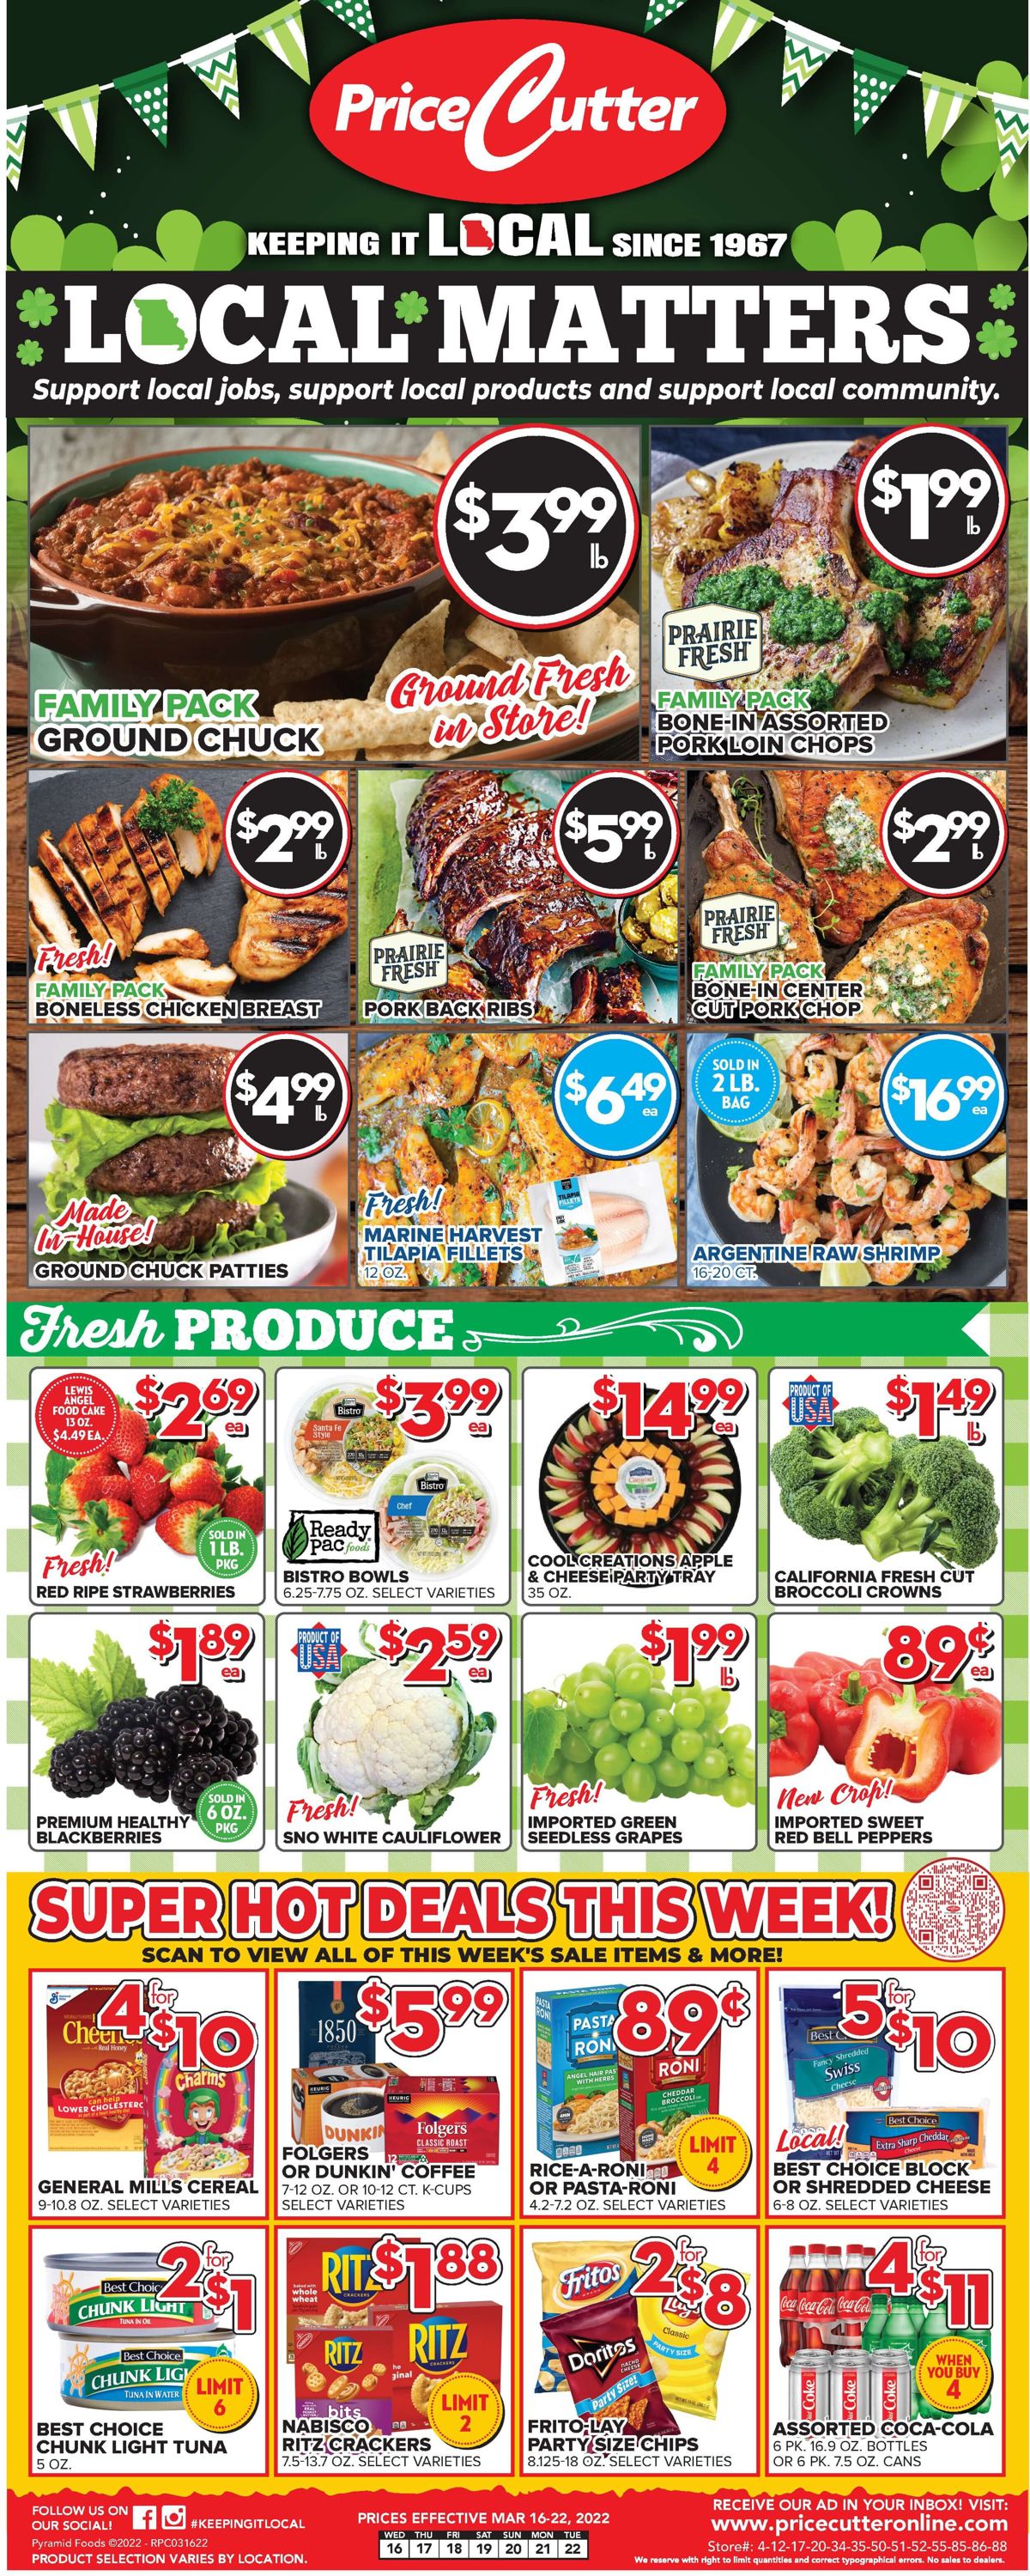 Price Cutter Weekly Ad Circular - valid 03/16-03/22/2022